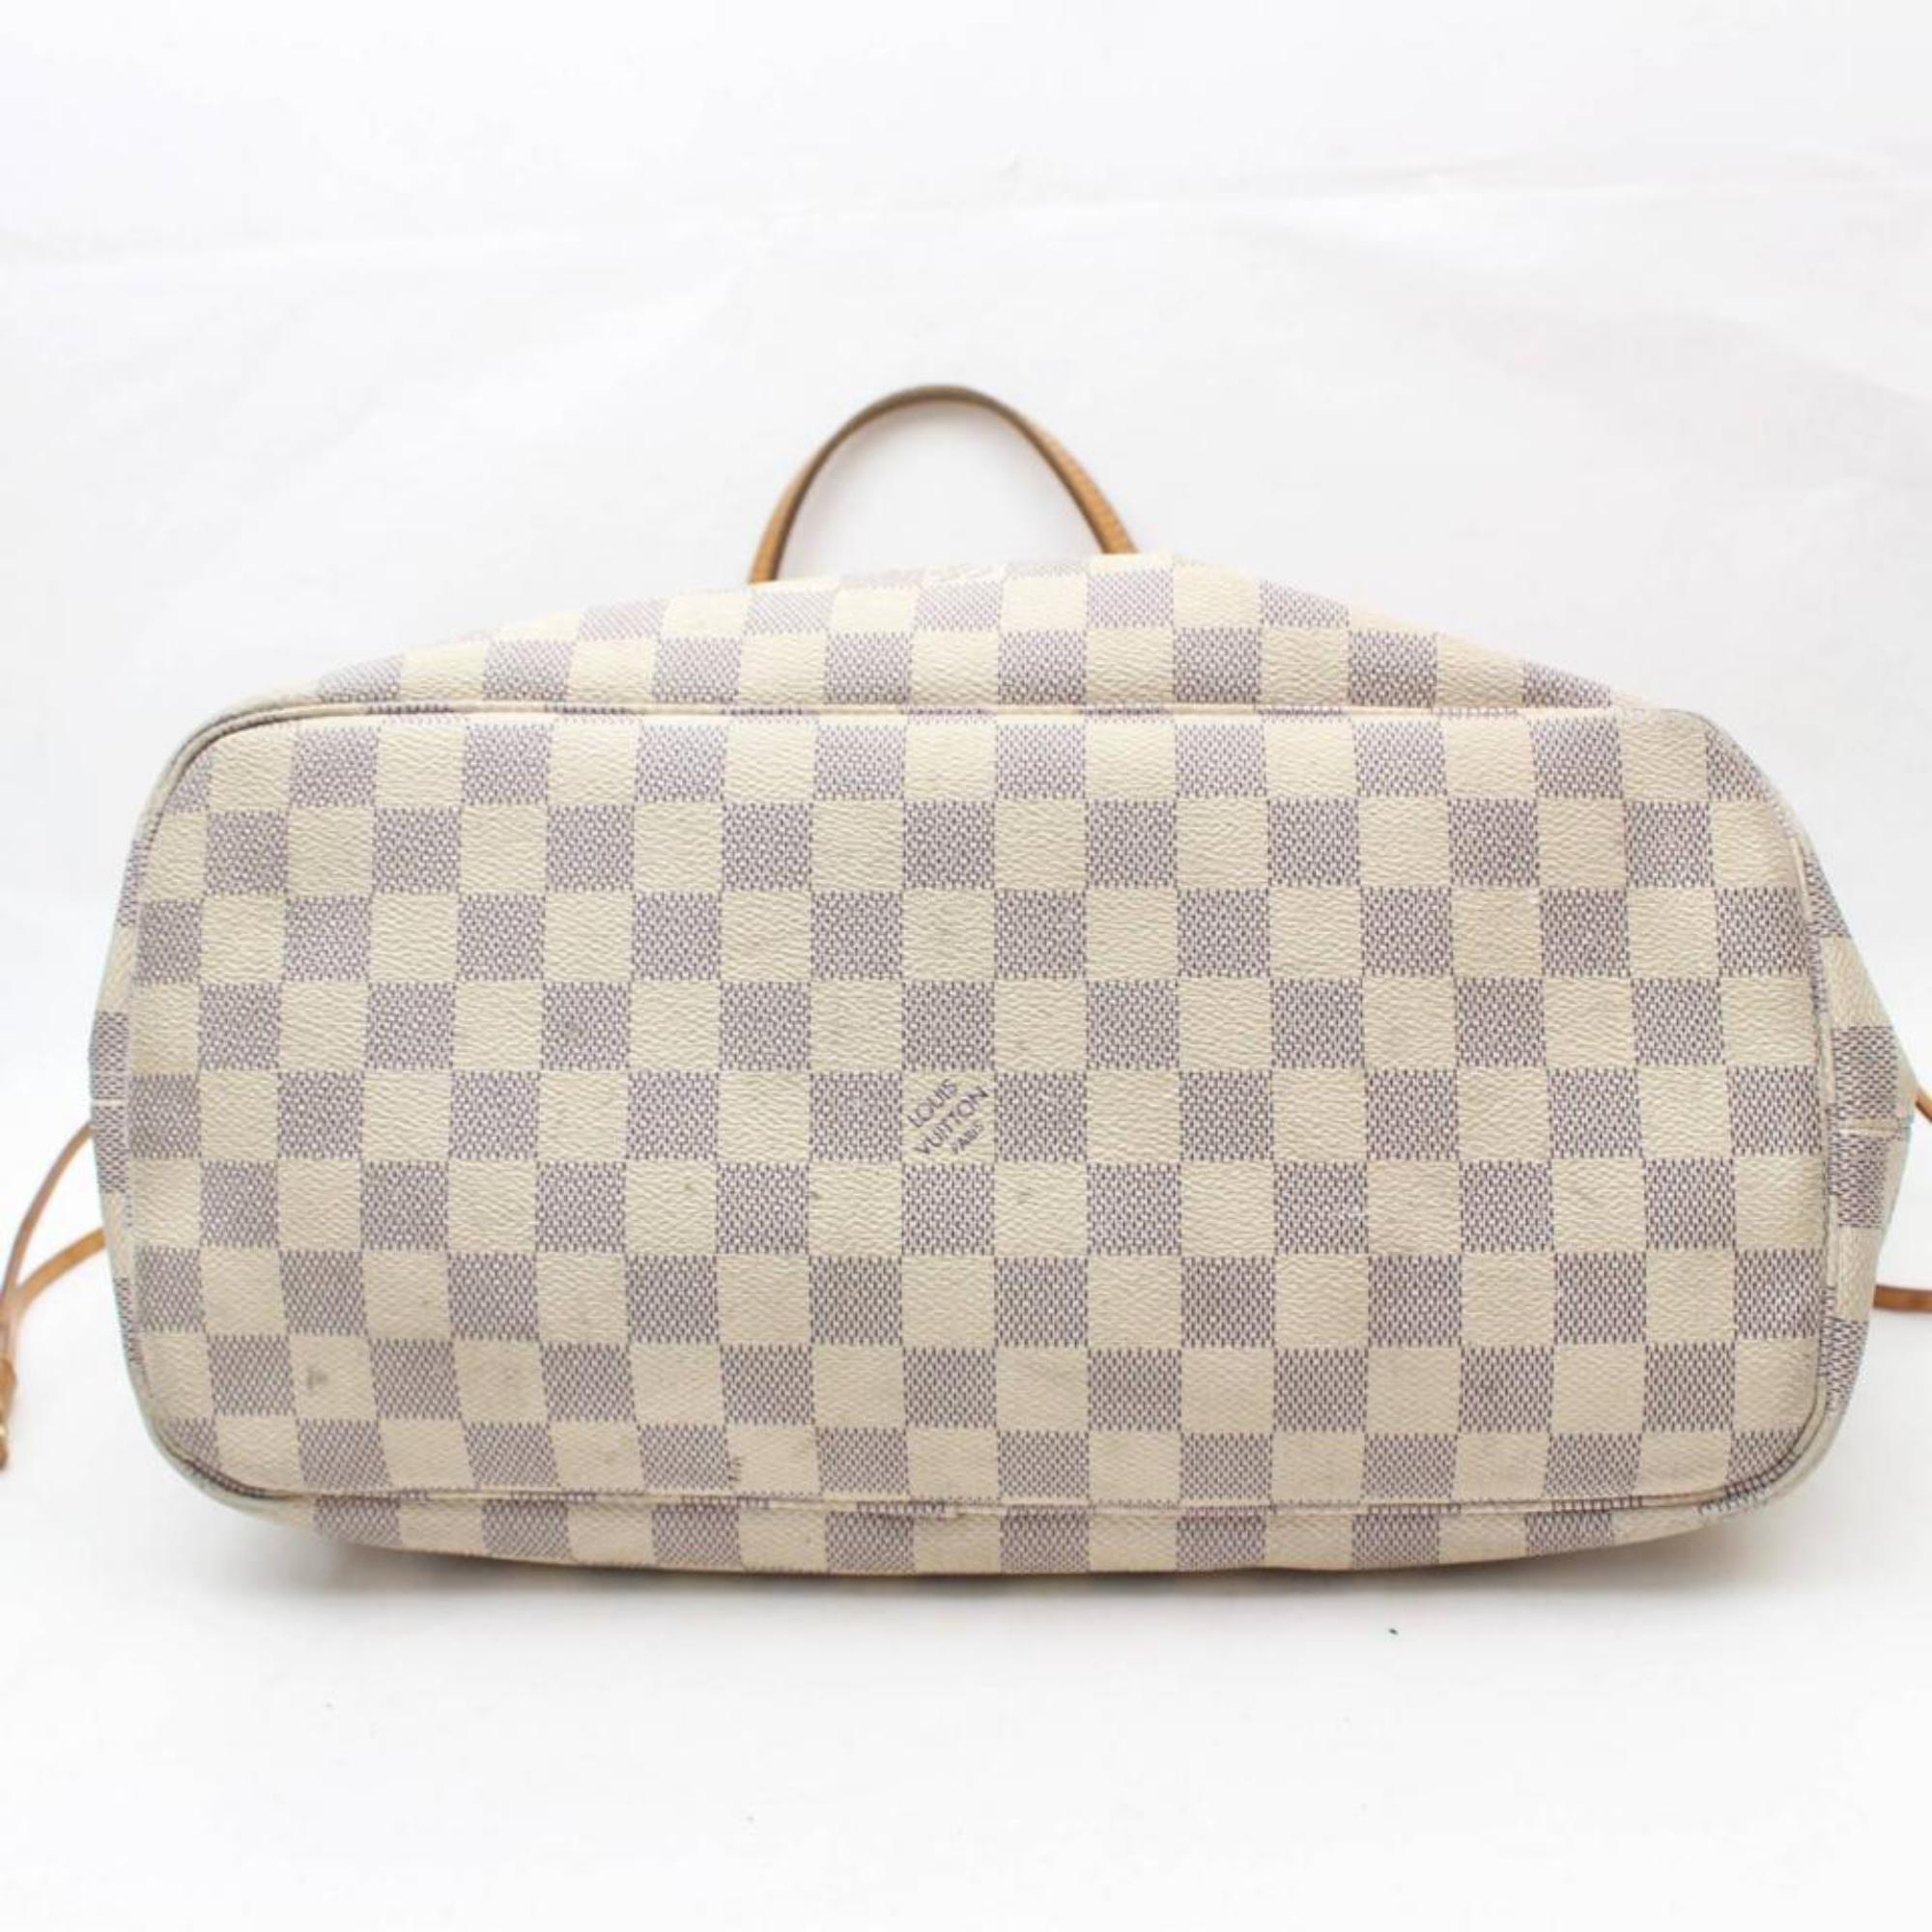 Louis Vuitton Neverfull Damier Azur Mm 868790 White Coated Canvas Tote For Sale 3